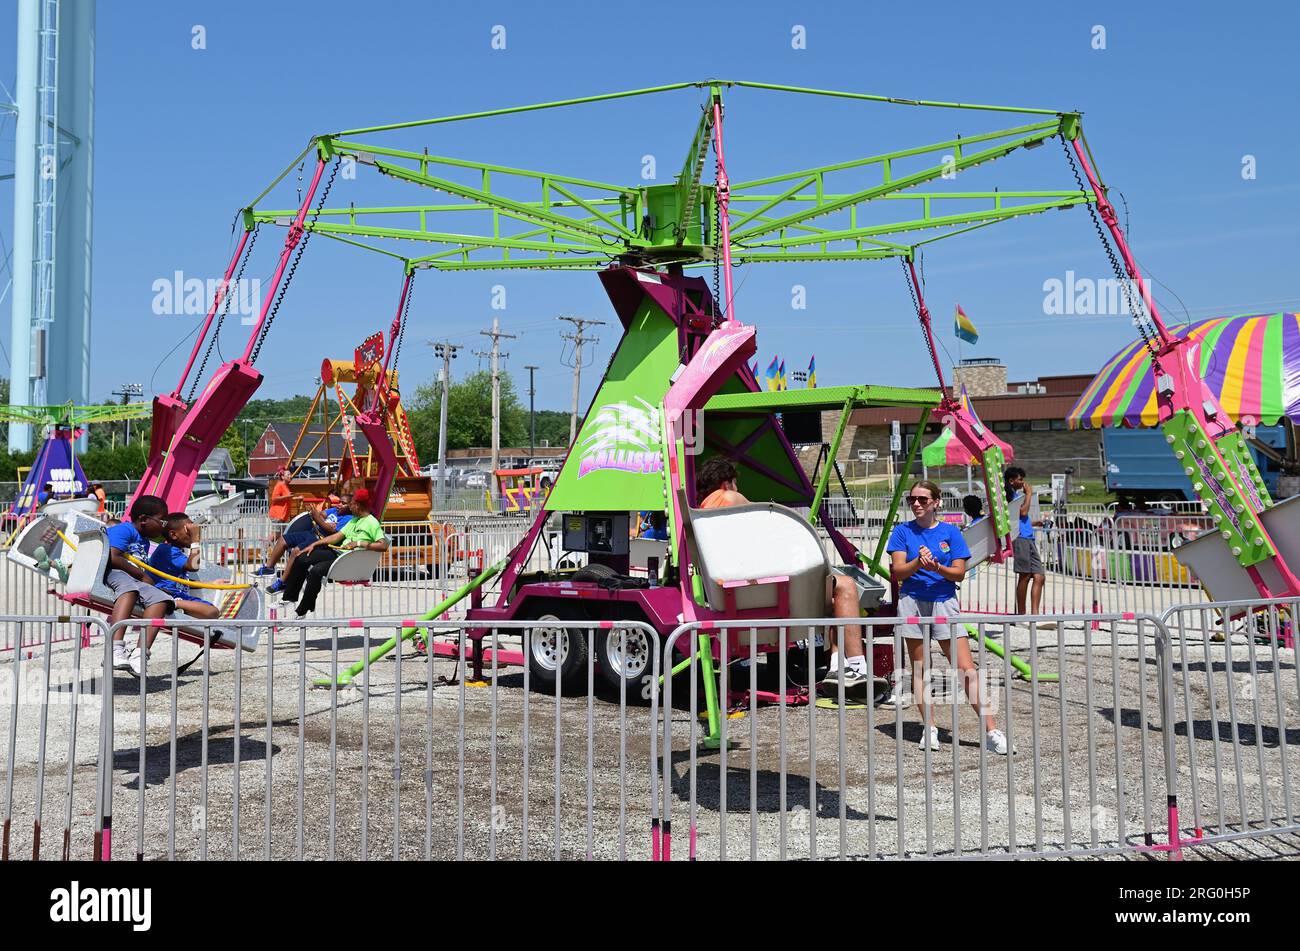 Wheaton, Illinois, USA. Despite very high temperatures, carnival or amusement rides are always popular with kids as was the case at the DuPage County Stock Photo